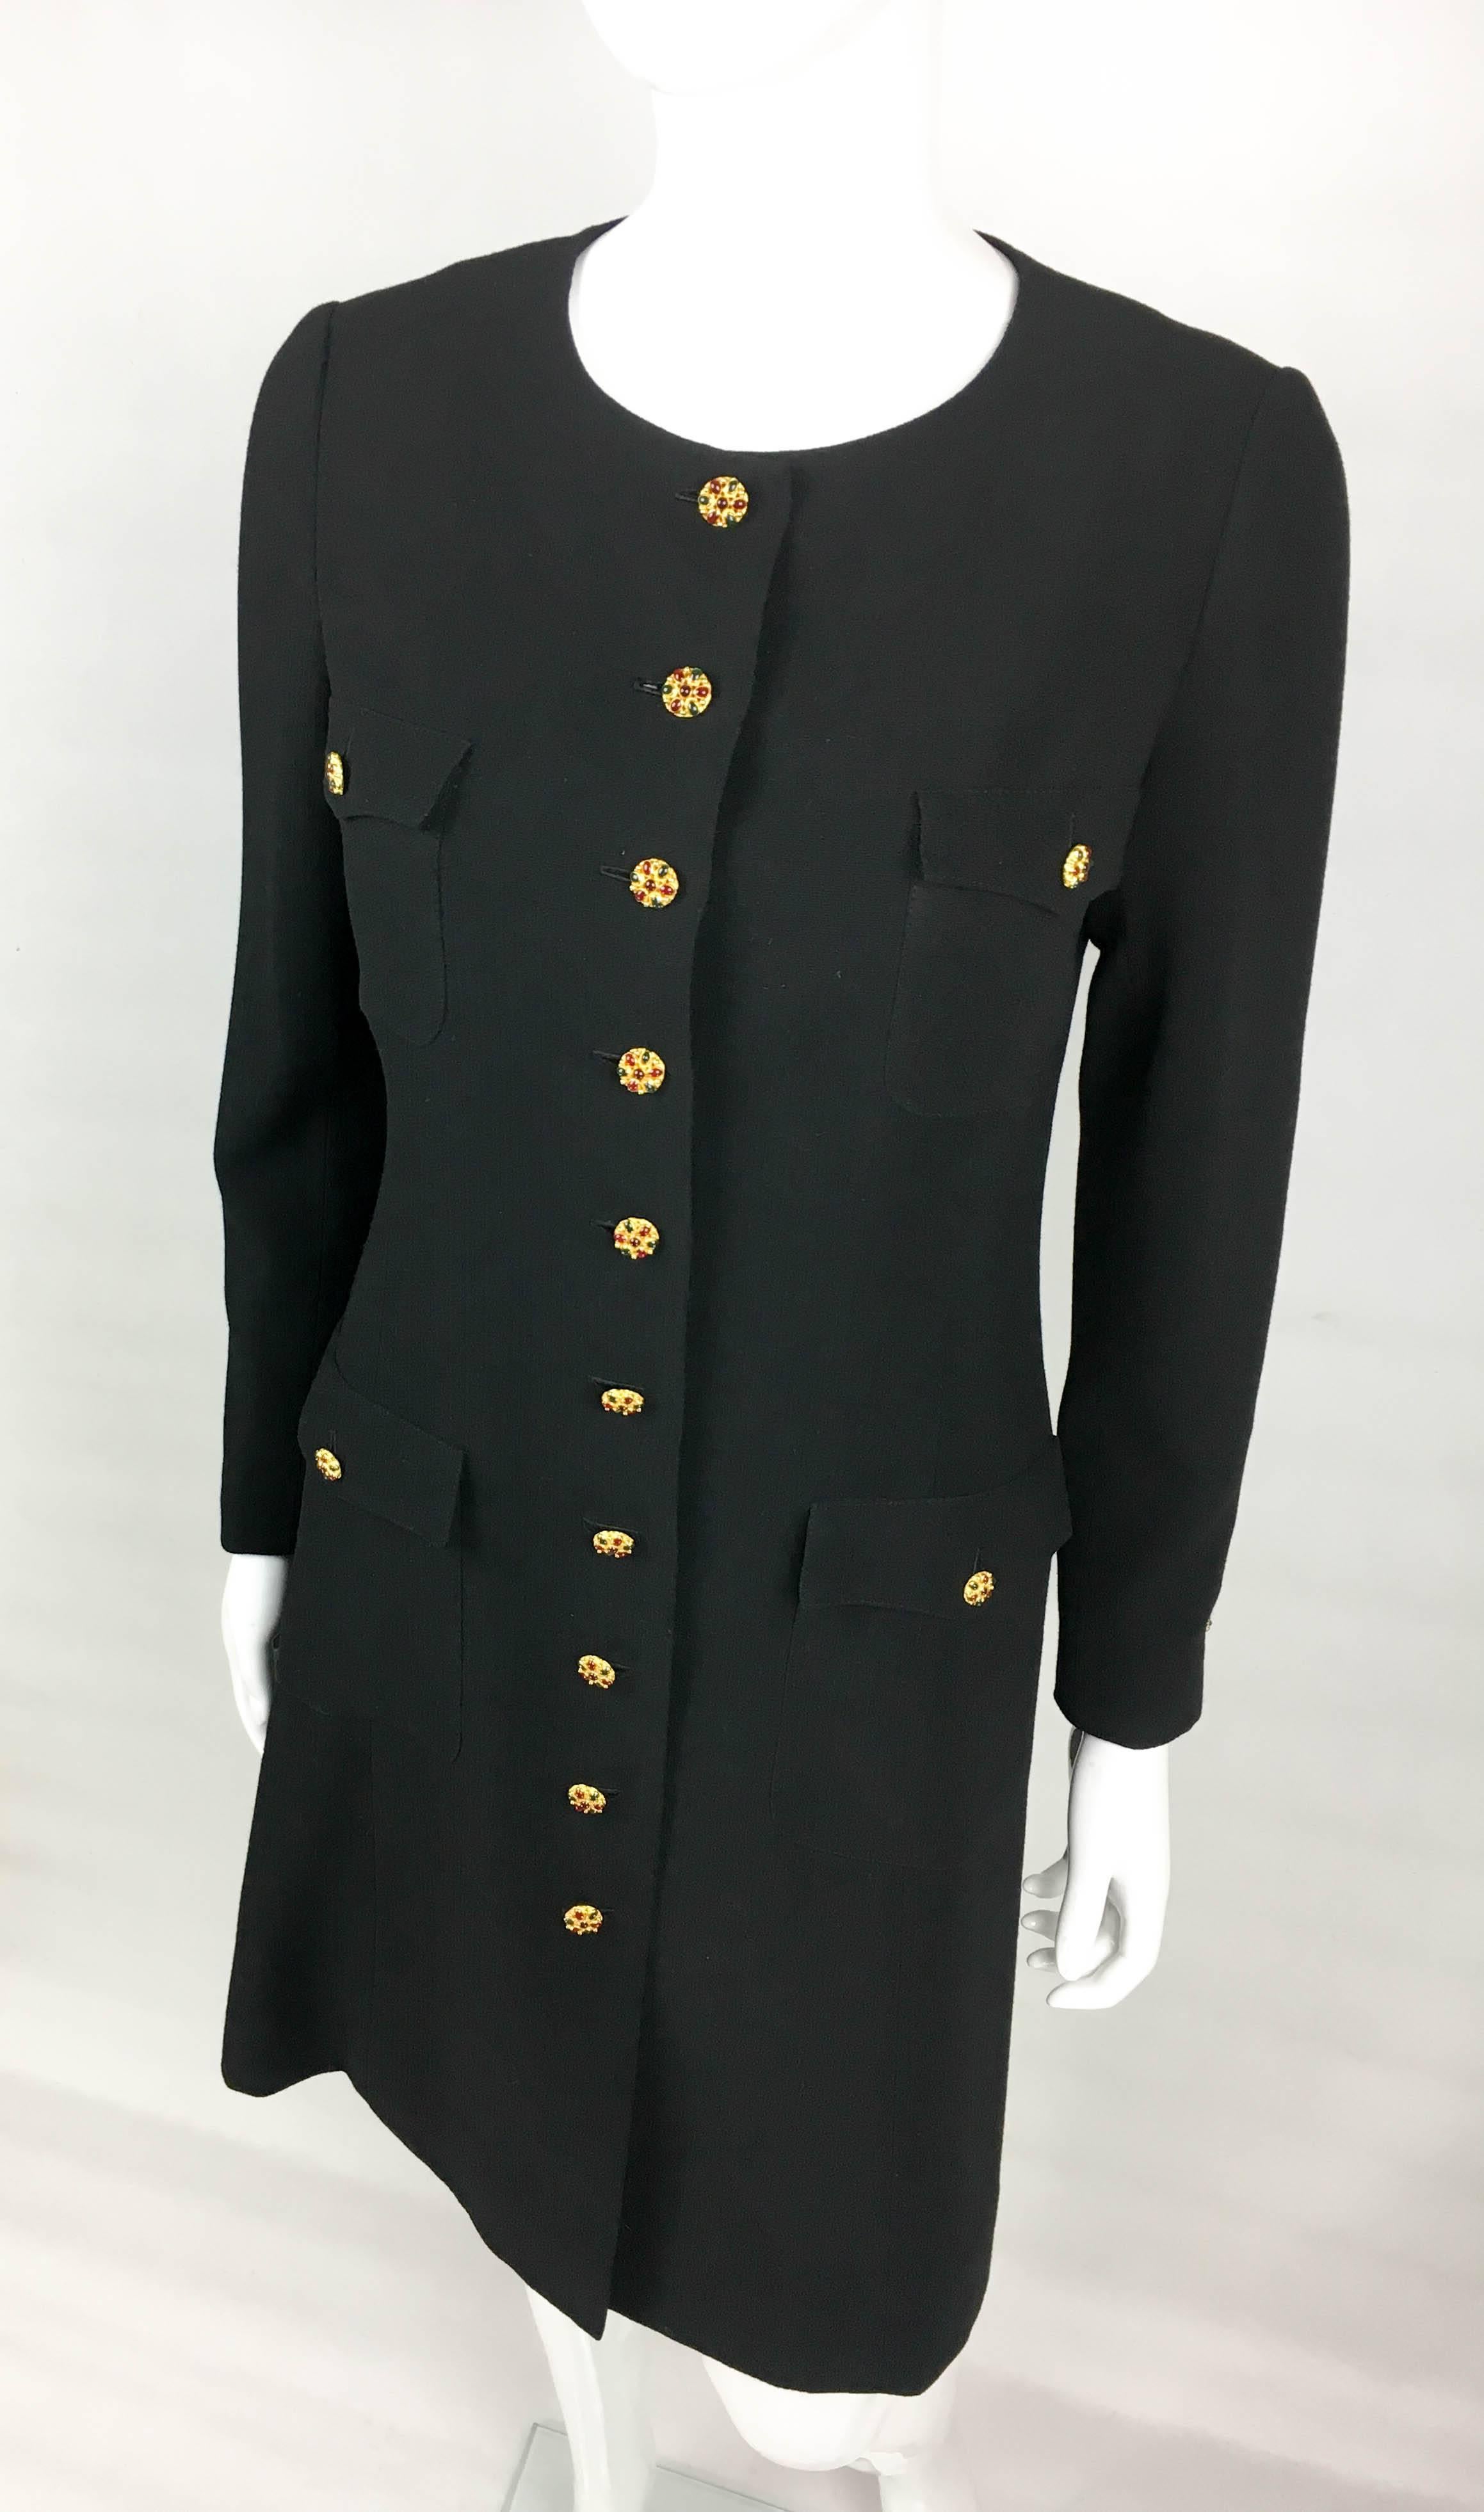 1996 Chanel Runway Look Black Wool Coat / Dress With Baroque-Style Buttons 1